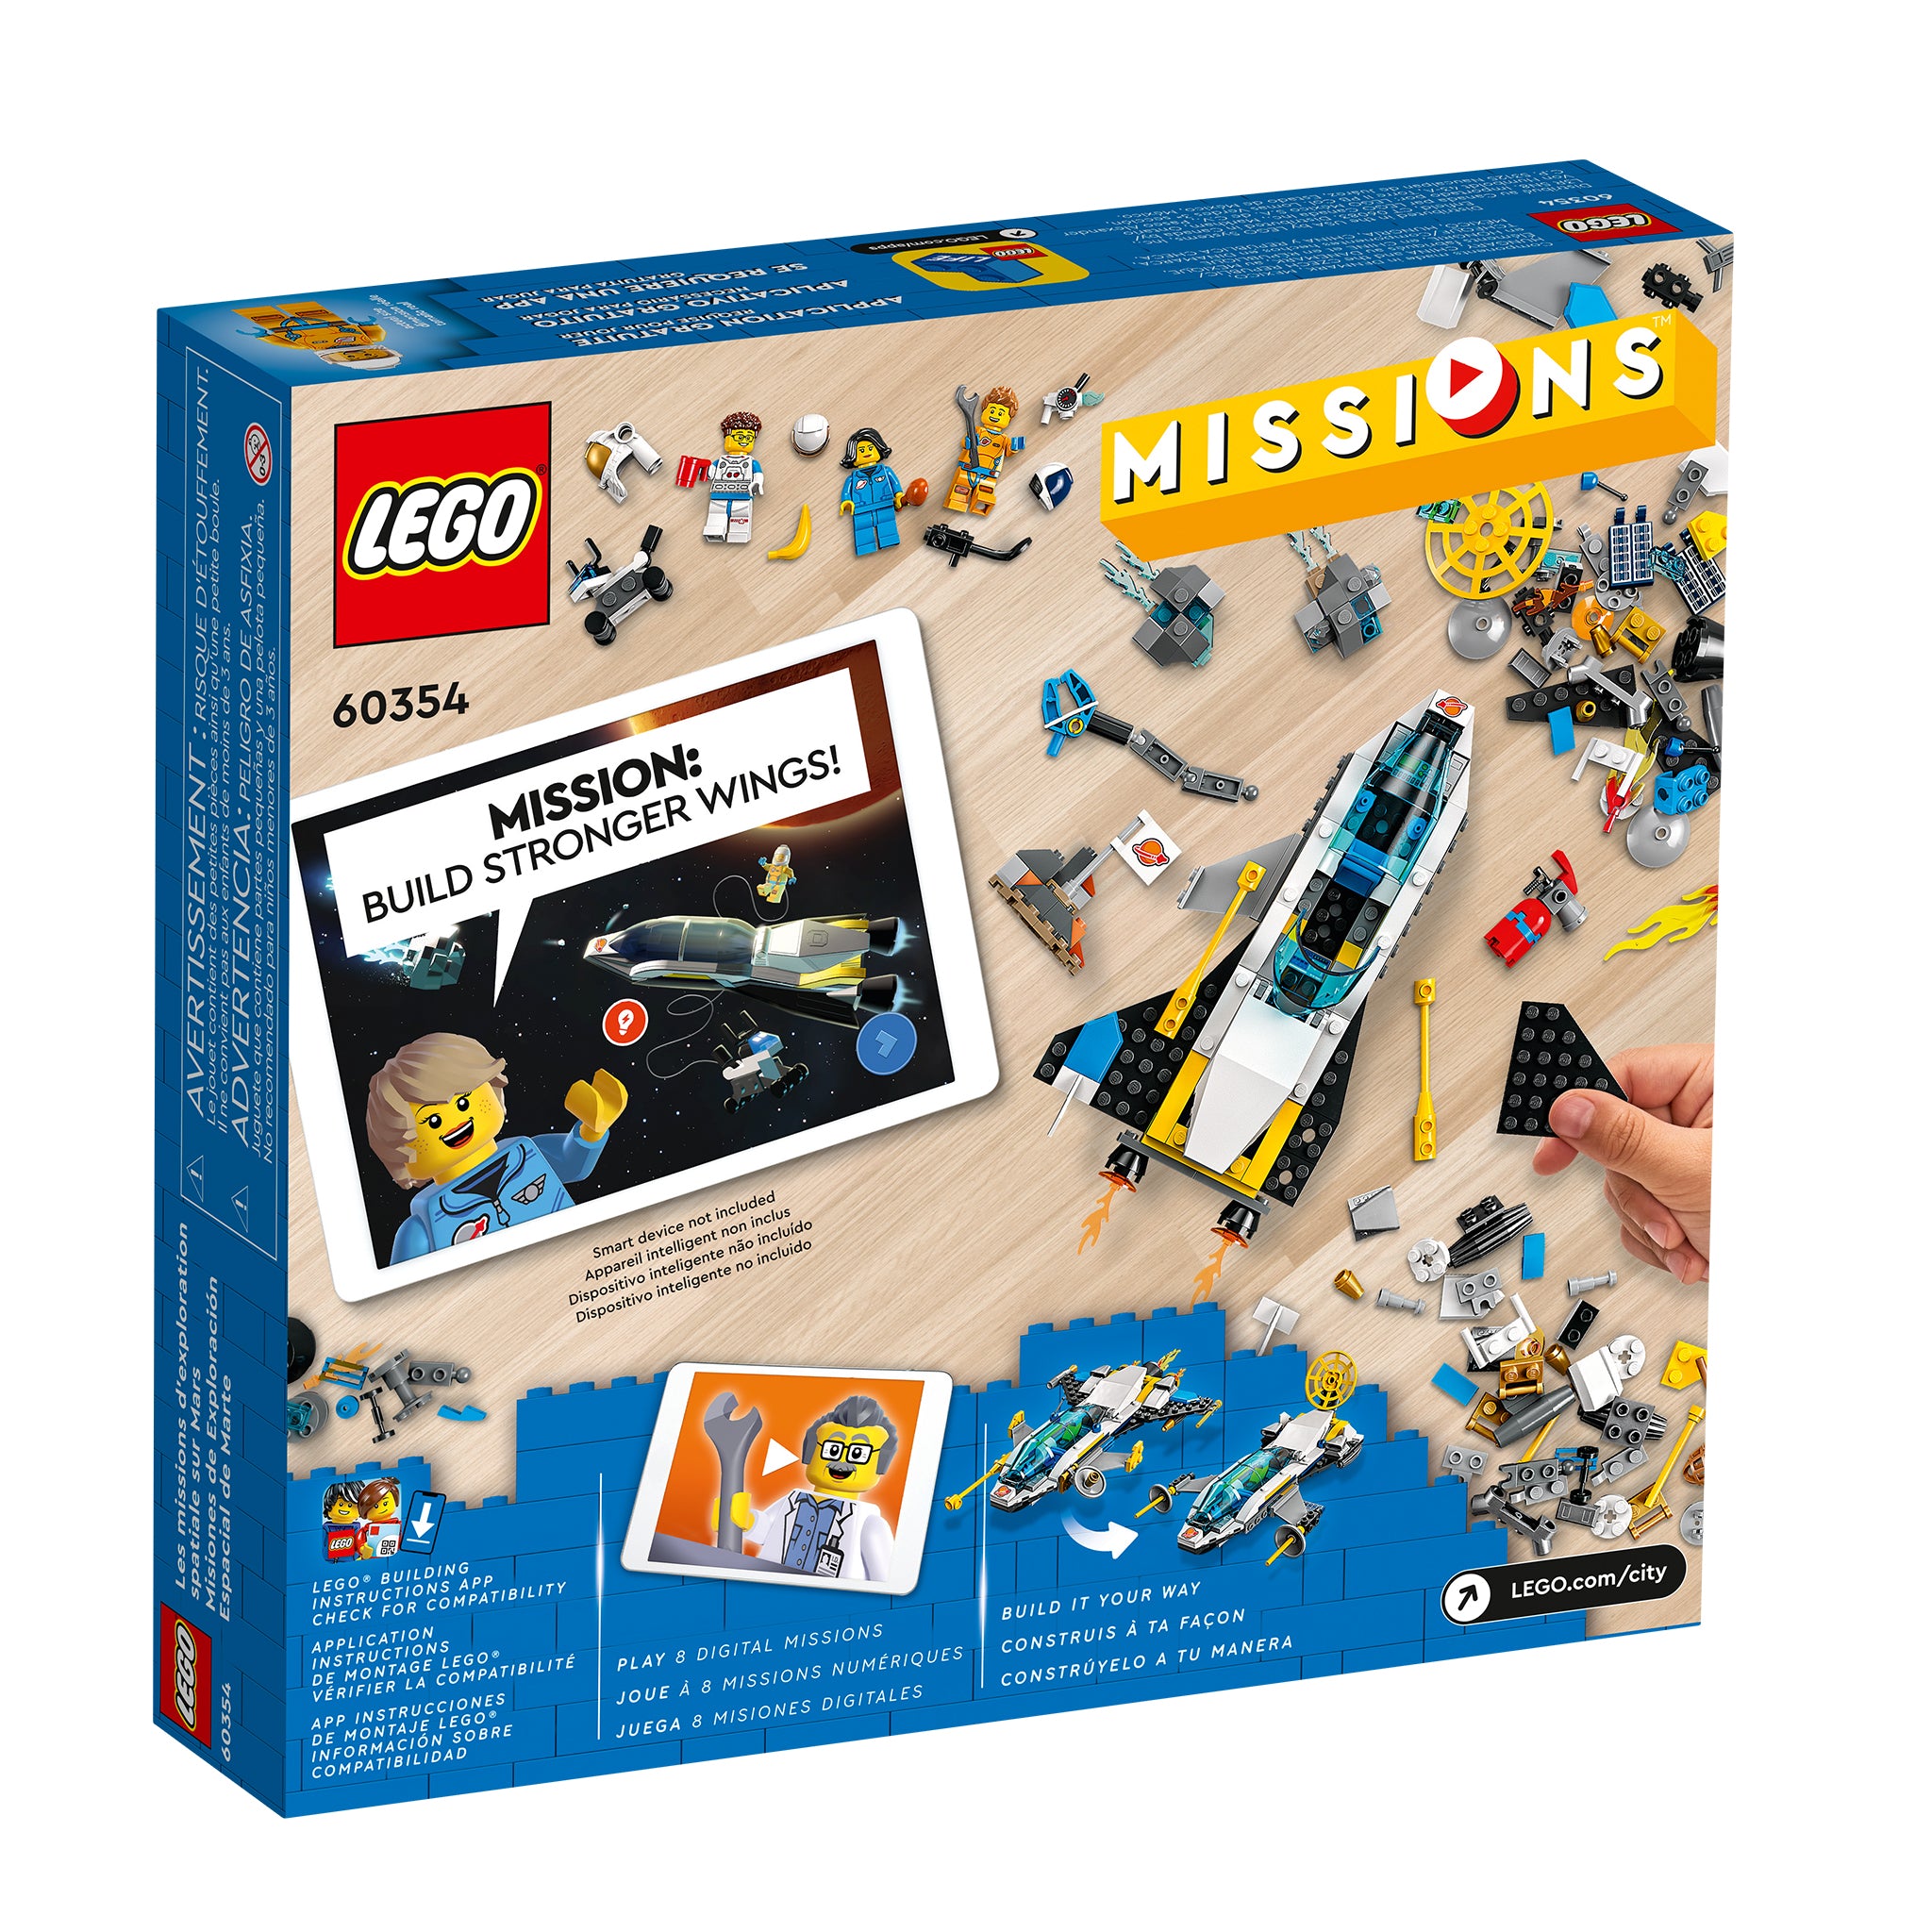 My account was disabled, Lego Copyright - Building Support